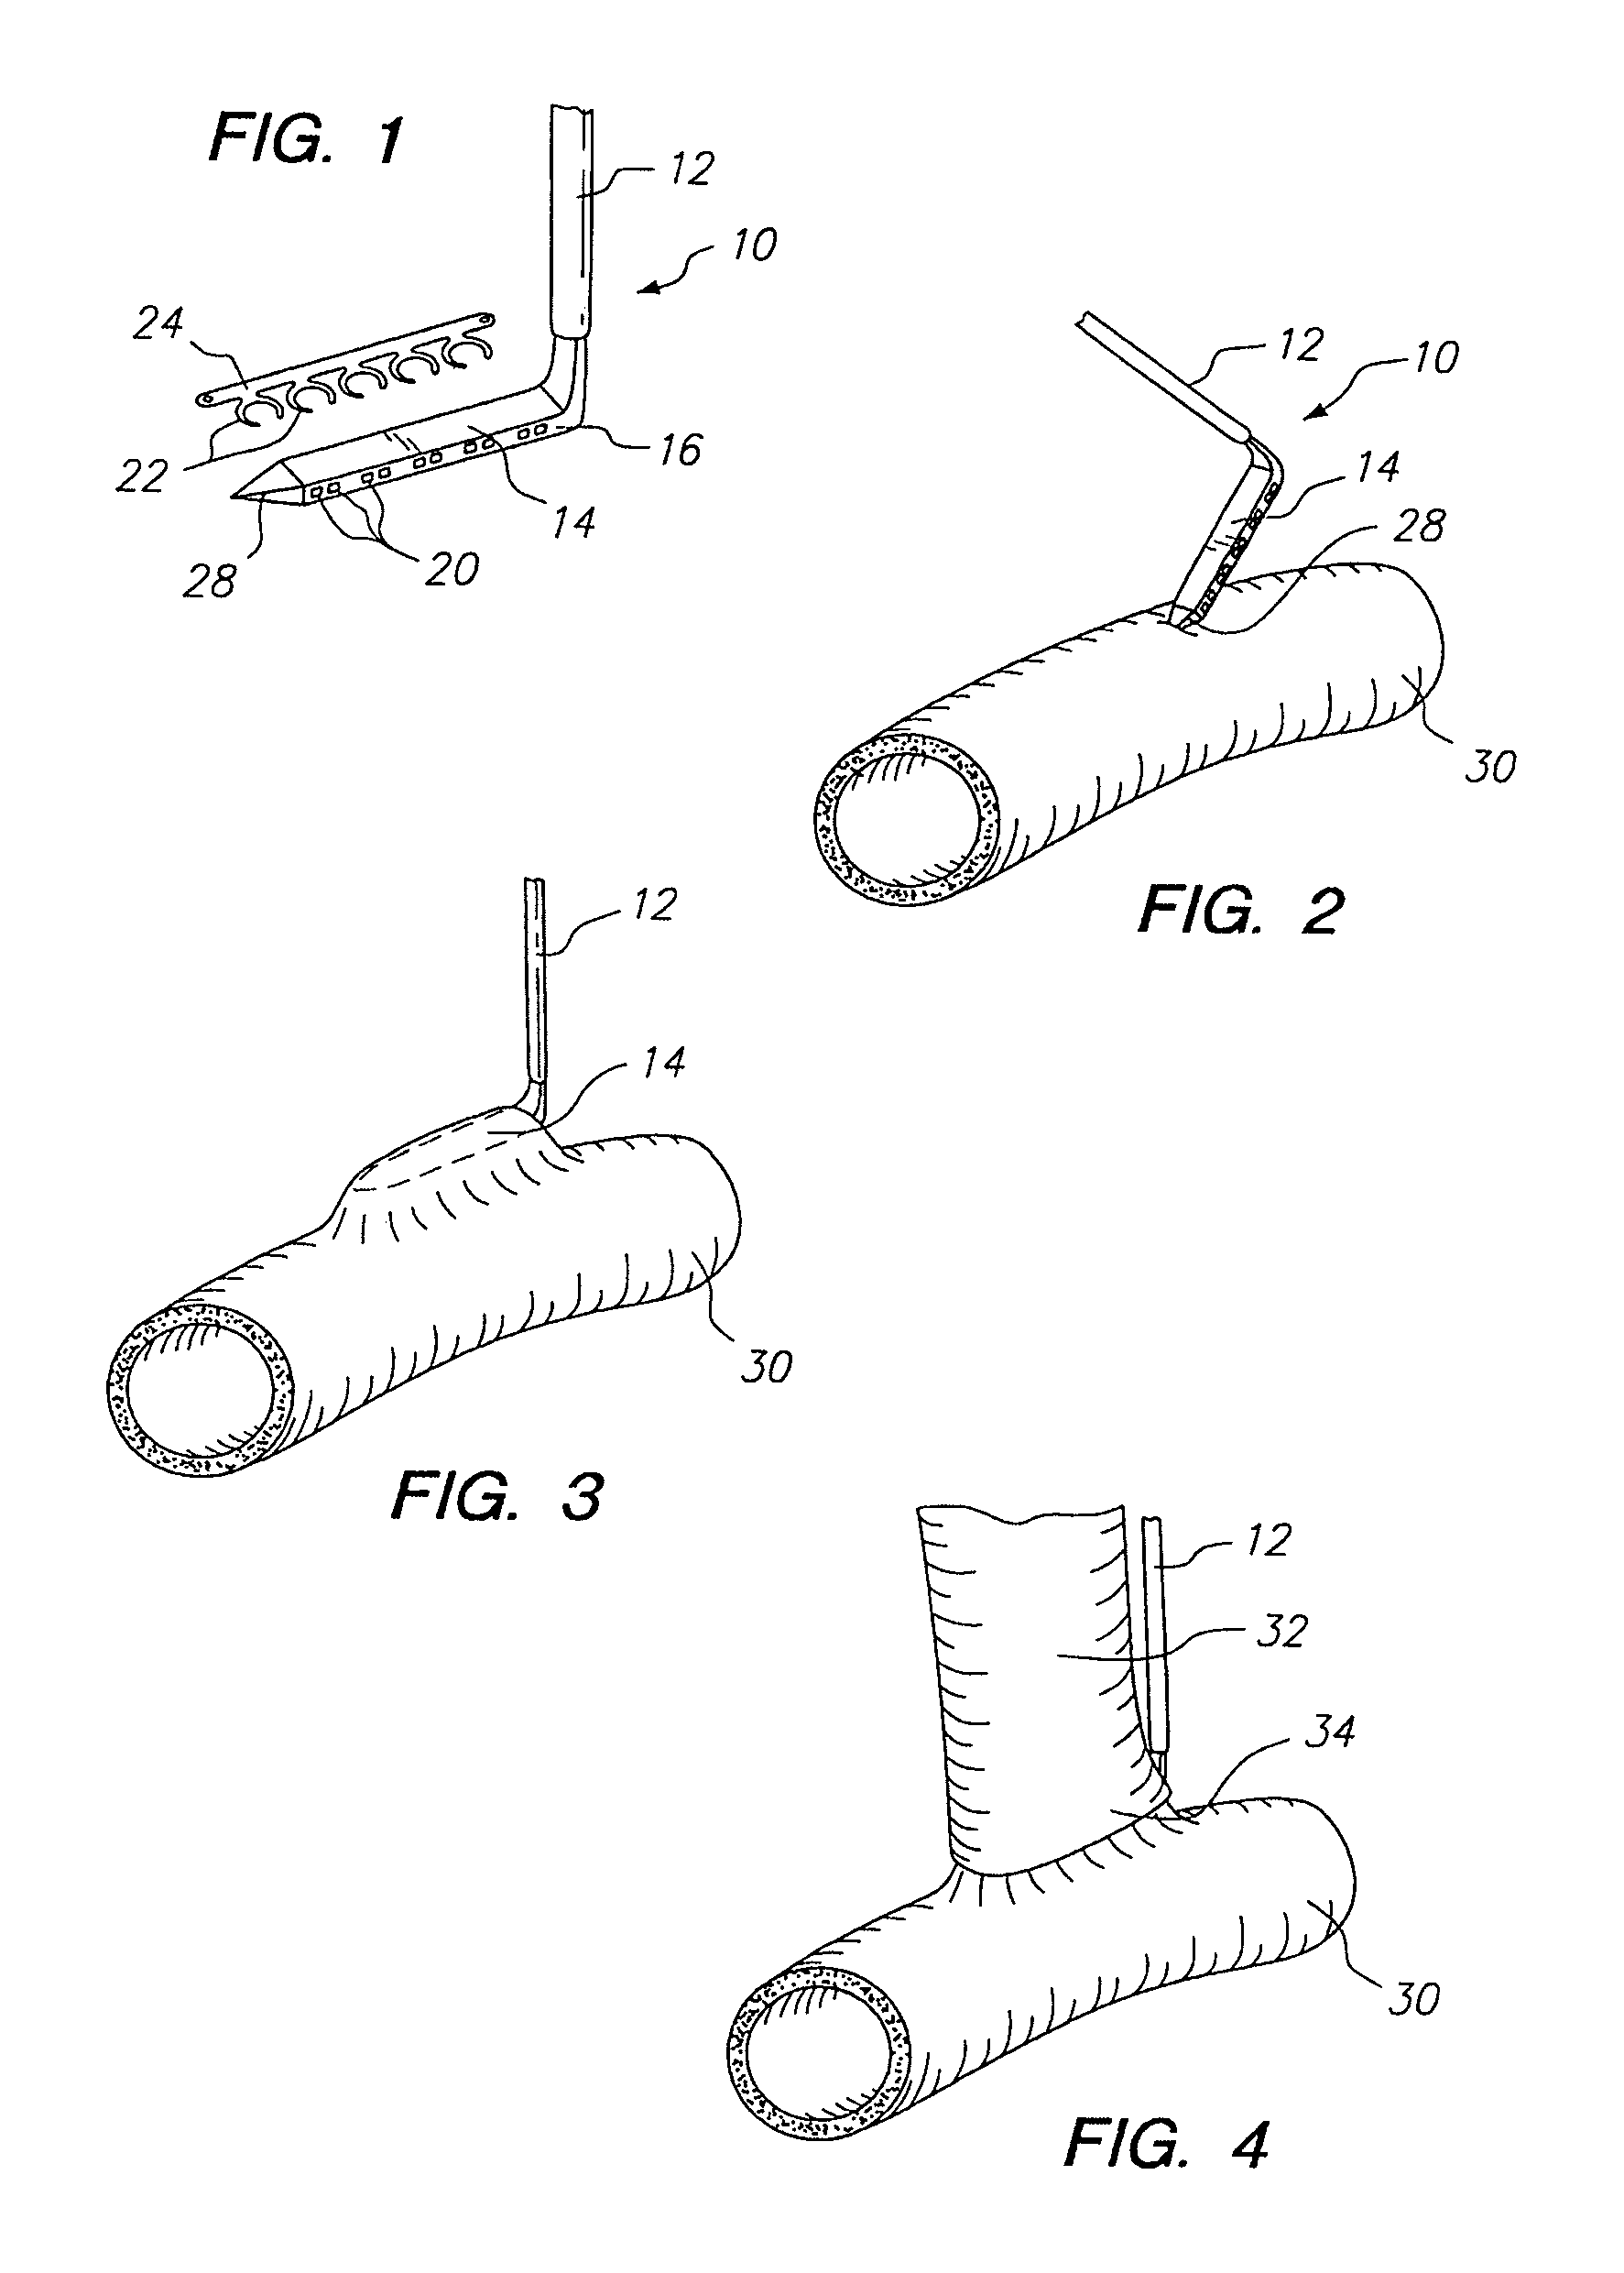 Surgical apparatus and method for anastomosis